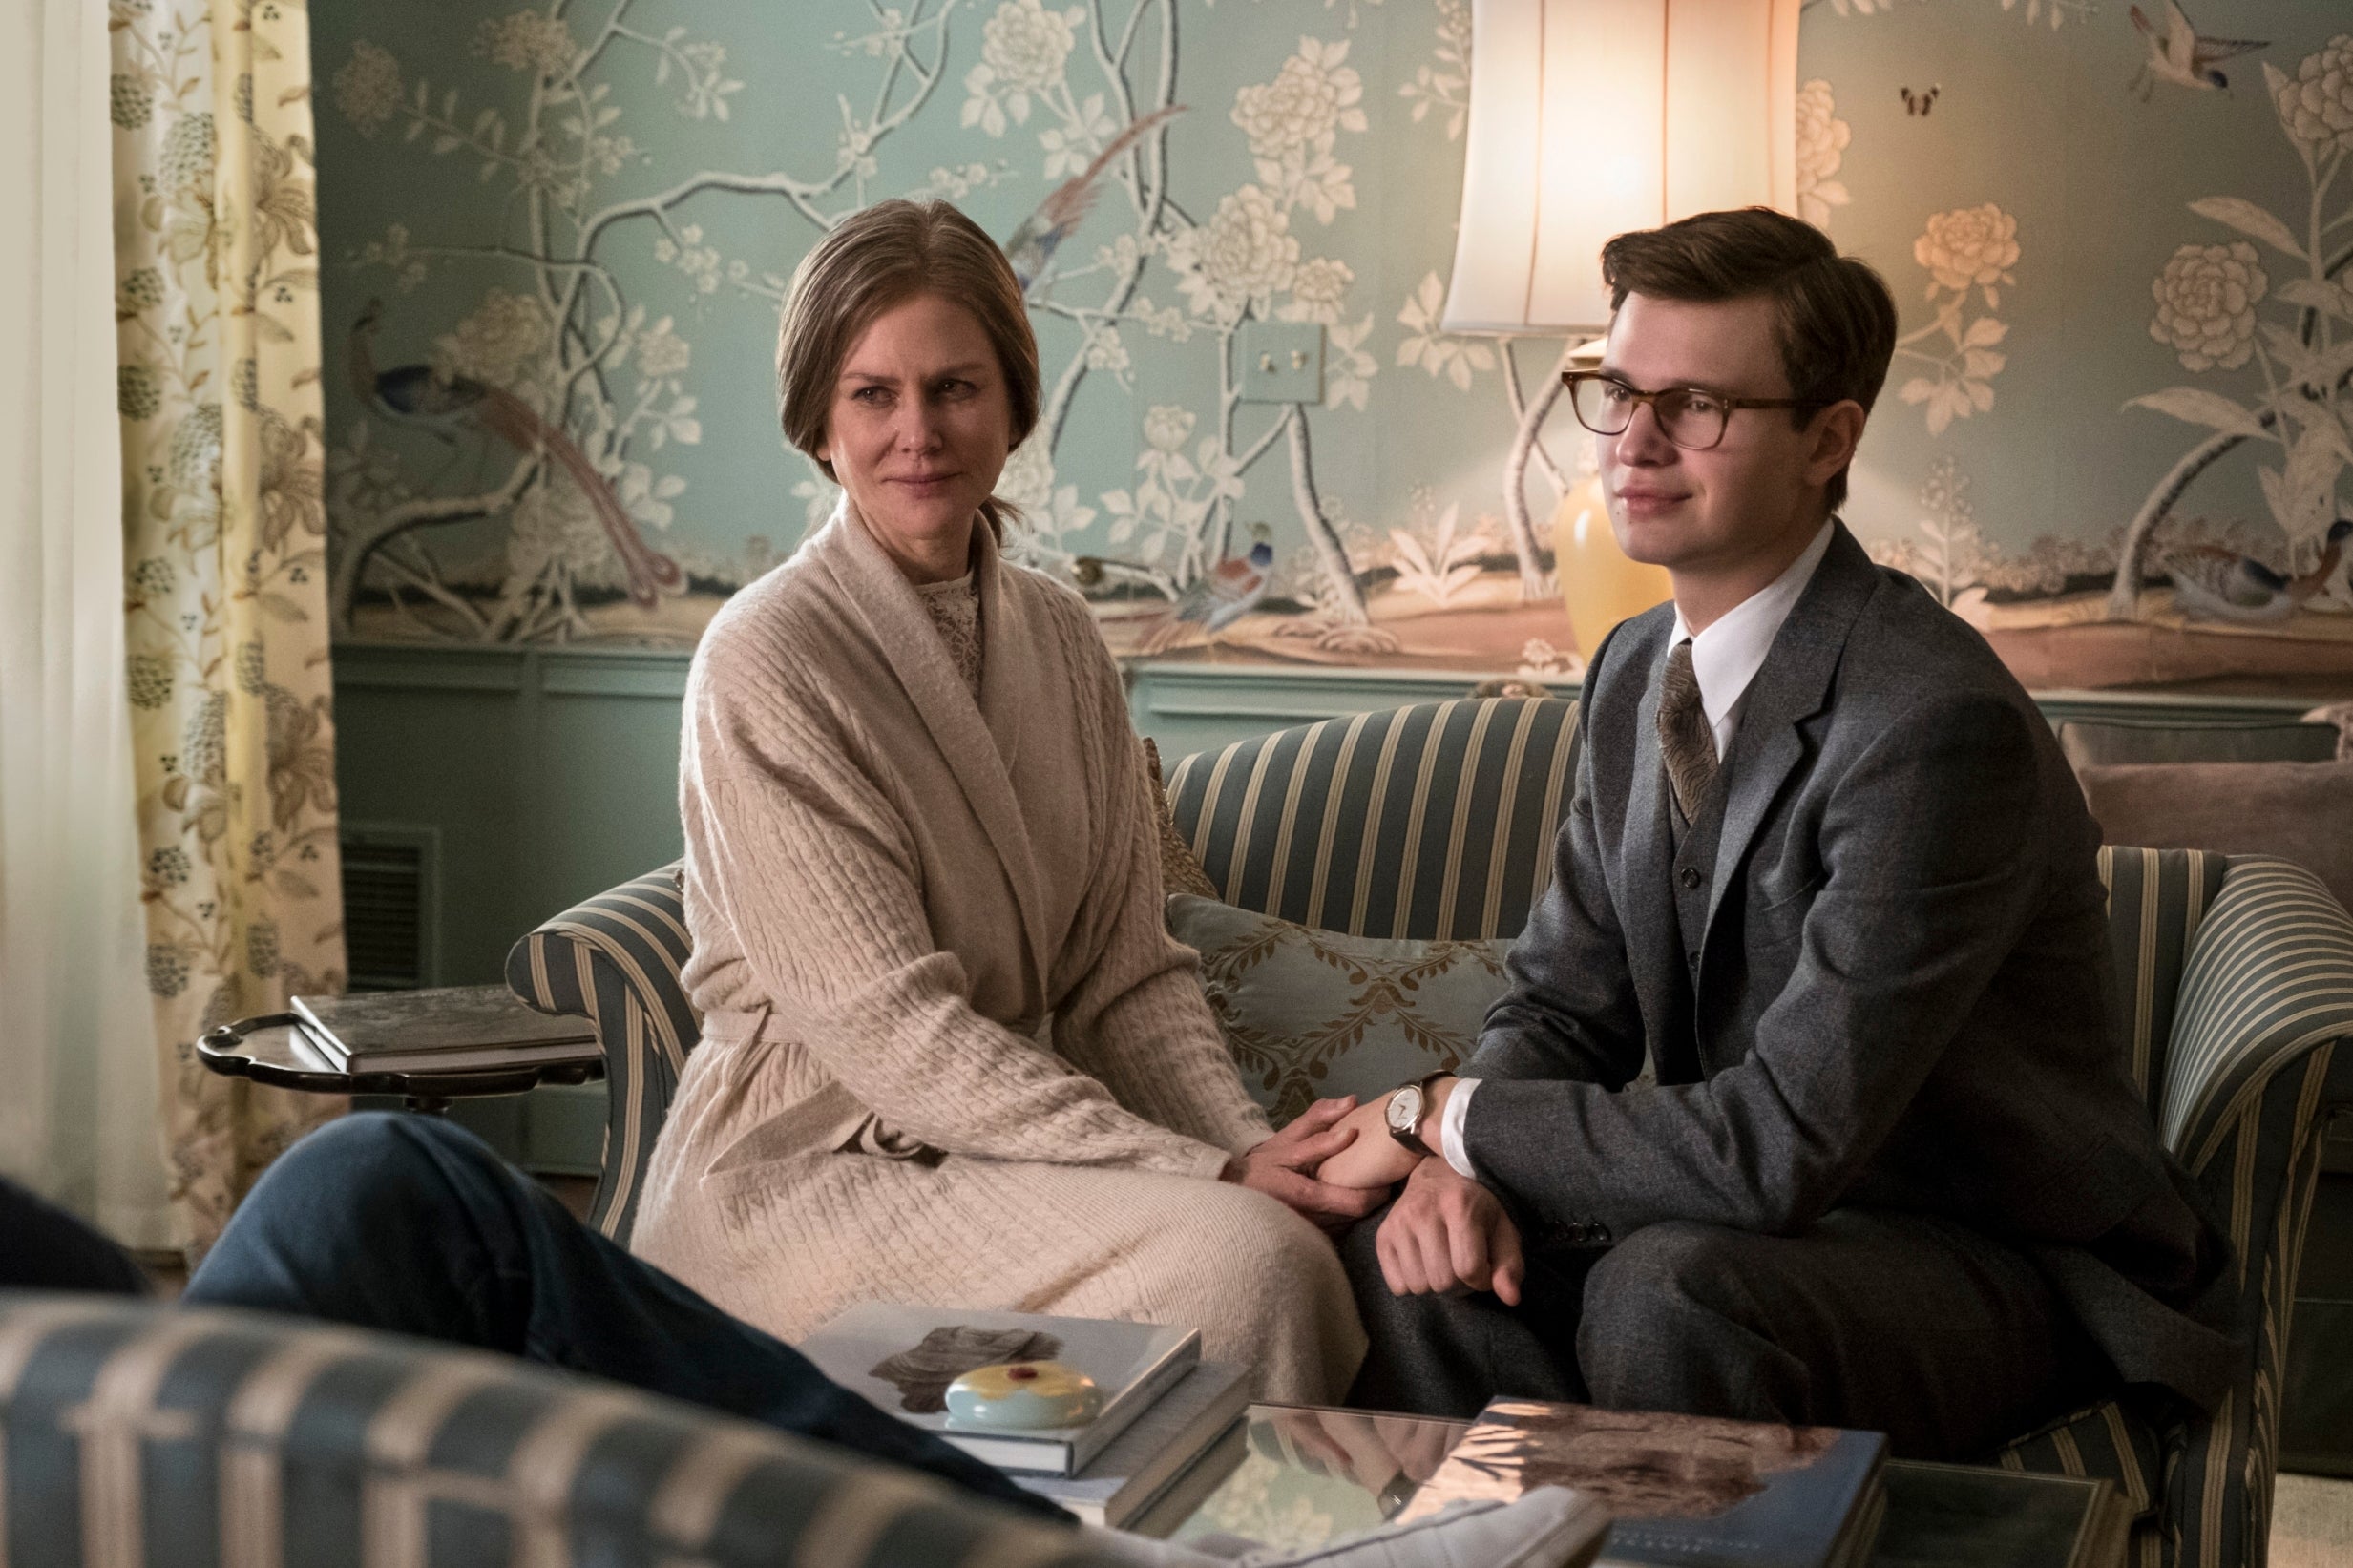 Nicole Kidman as Mrs Barbour and Ansel Elgort as Theo Decker in ‘The Goldfinch’